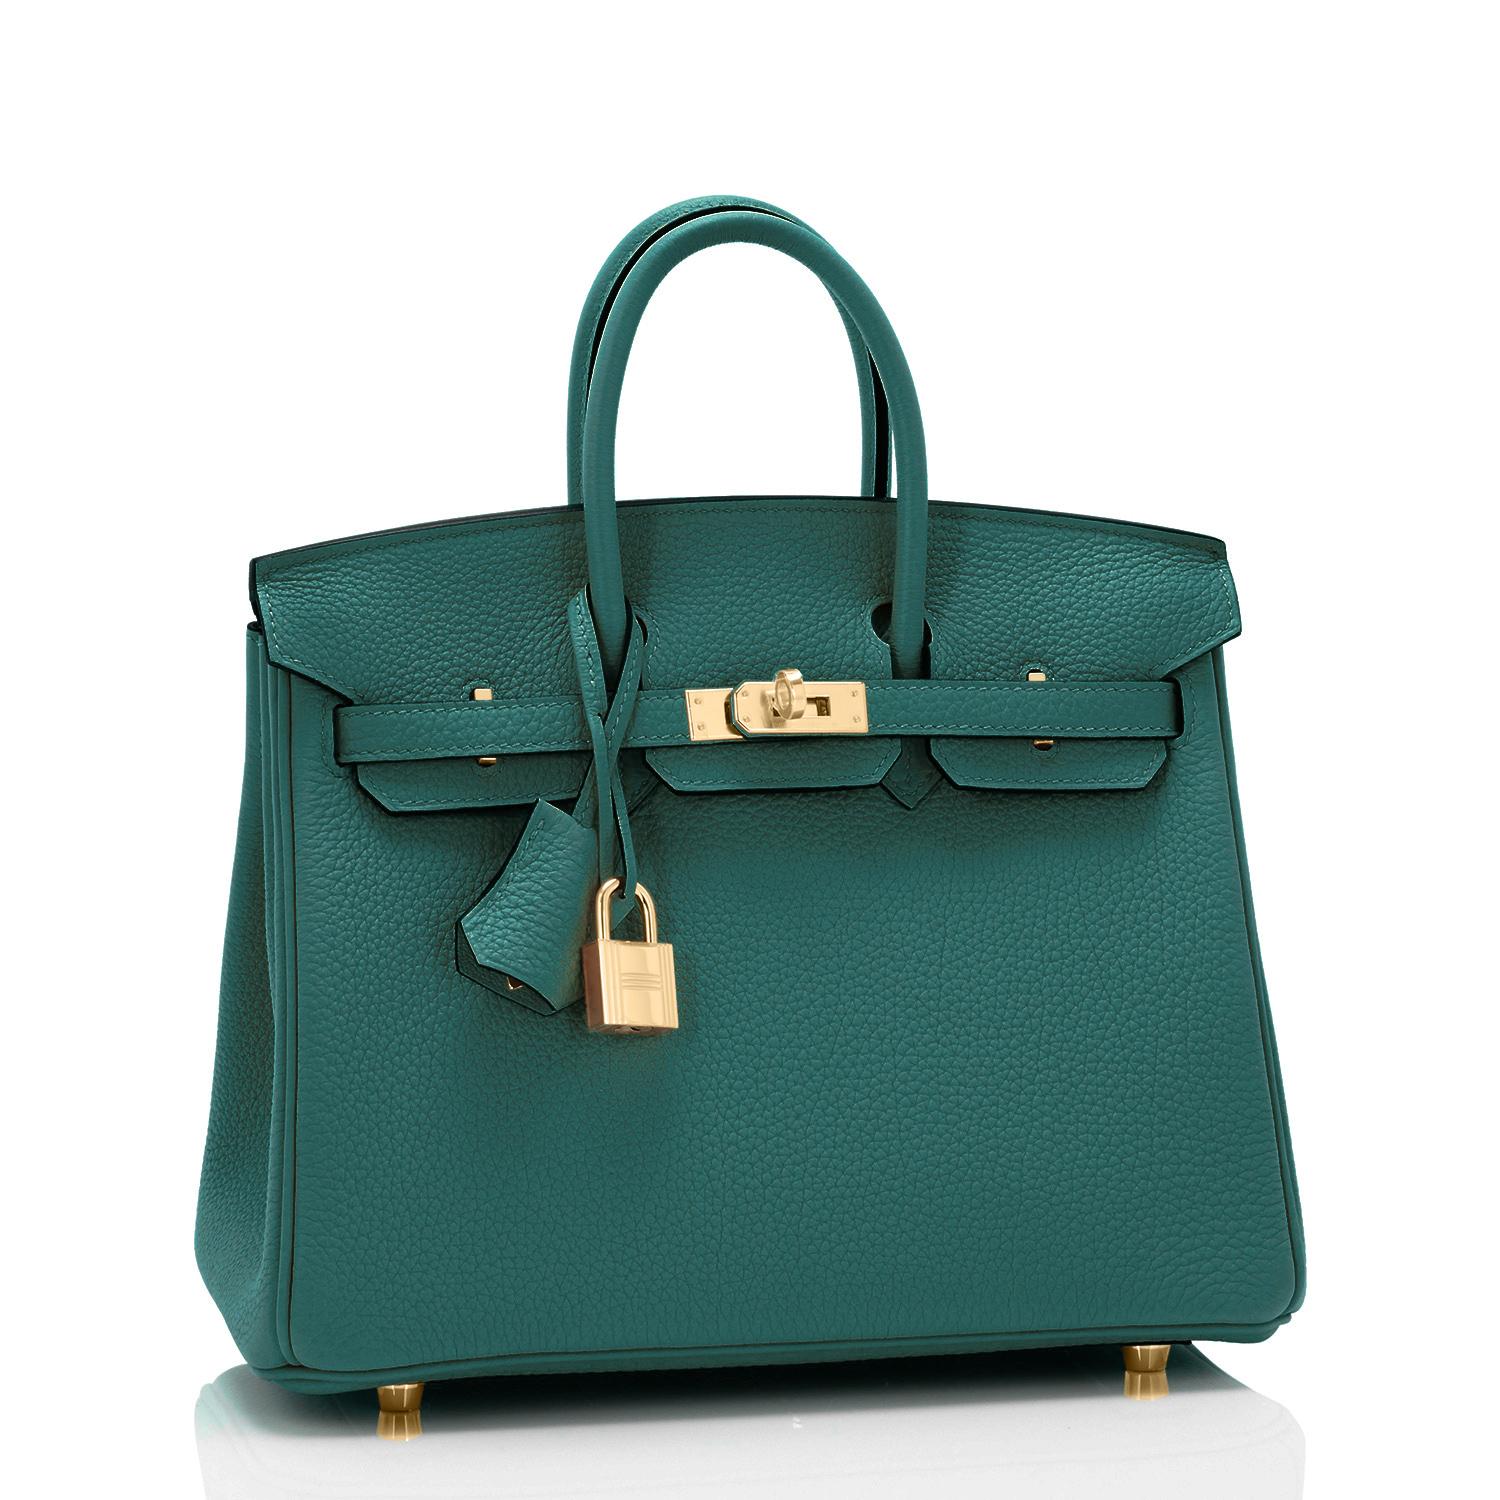 Hermes Malachite 25cm Birkin Jewel Tone Green Togo Gold Hardware Y Stamp, 2020
Just purchased from Hermes store; bag bears new interior 2020 Stamp.
Brand New in Box. Store fresh. Pristine Condition (with plastic on hardware)
Perfect gift!  Comes